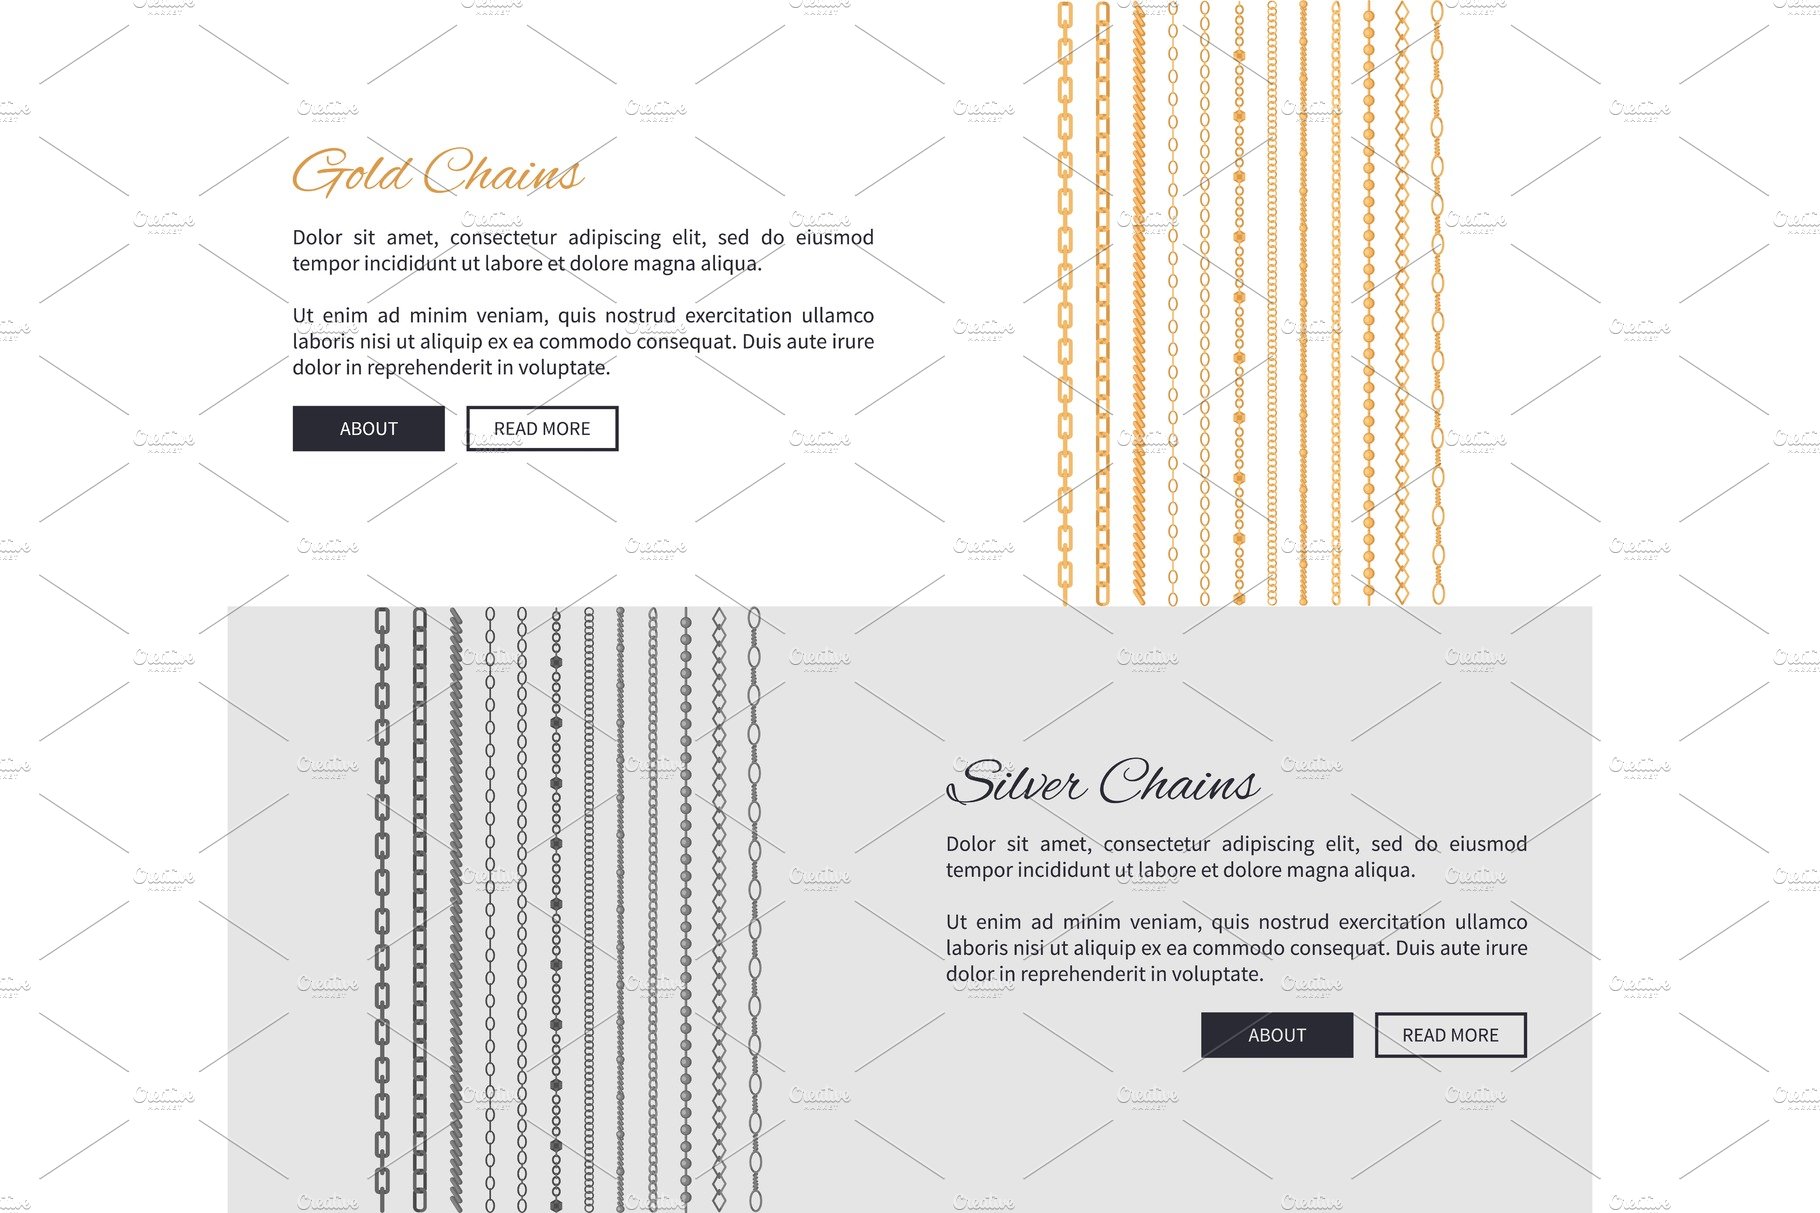 Gold and Silver Chains Page Vector Illustration cover image.